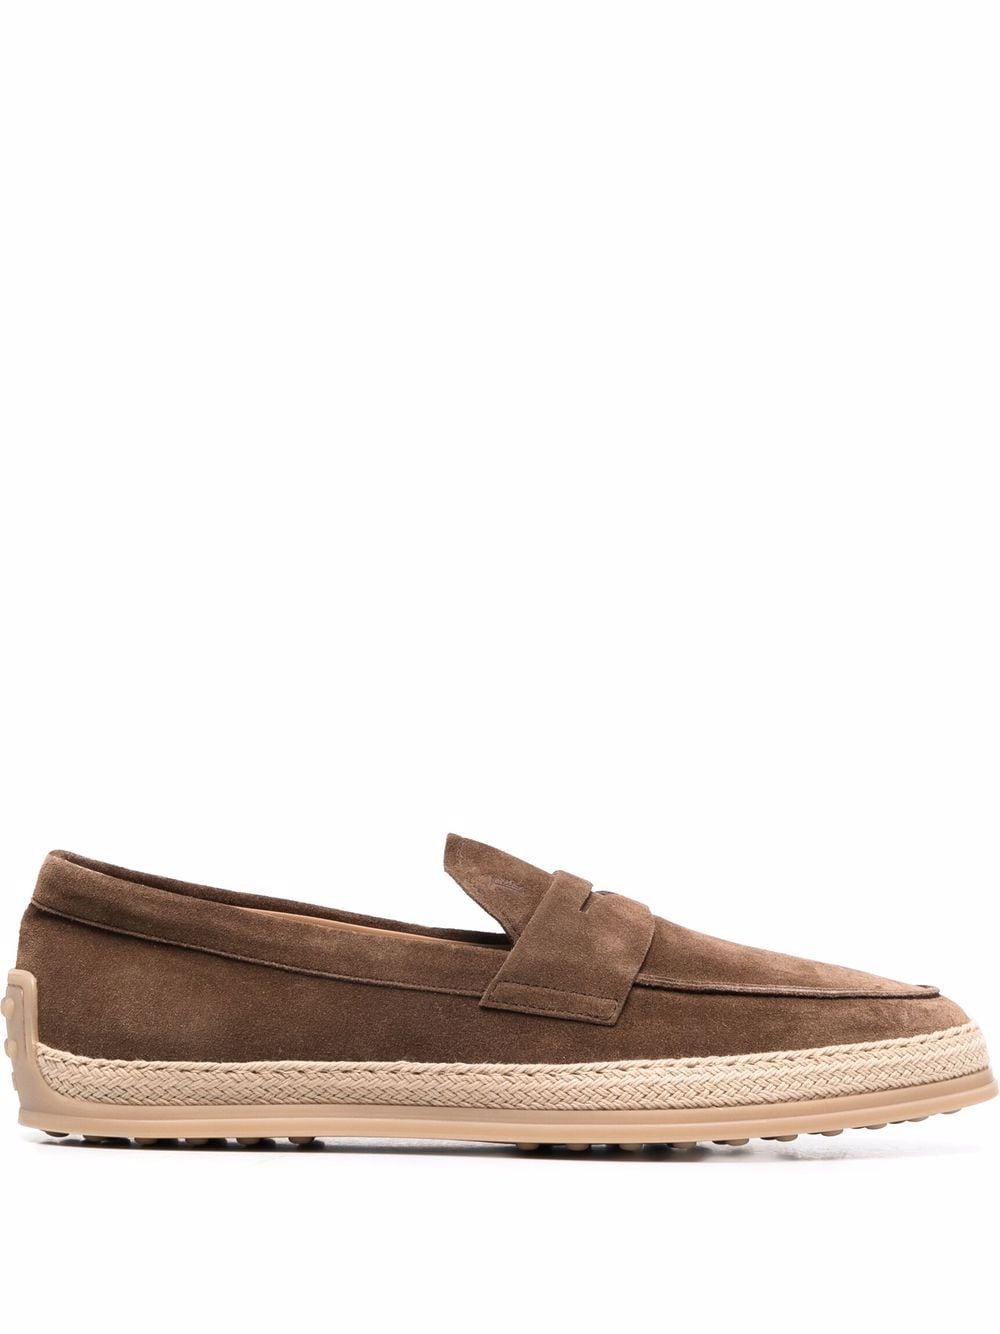 Tod's woven trim penny loafers - Brown von Tod's